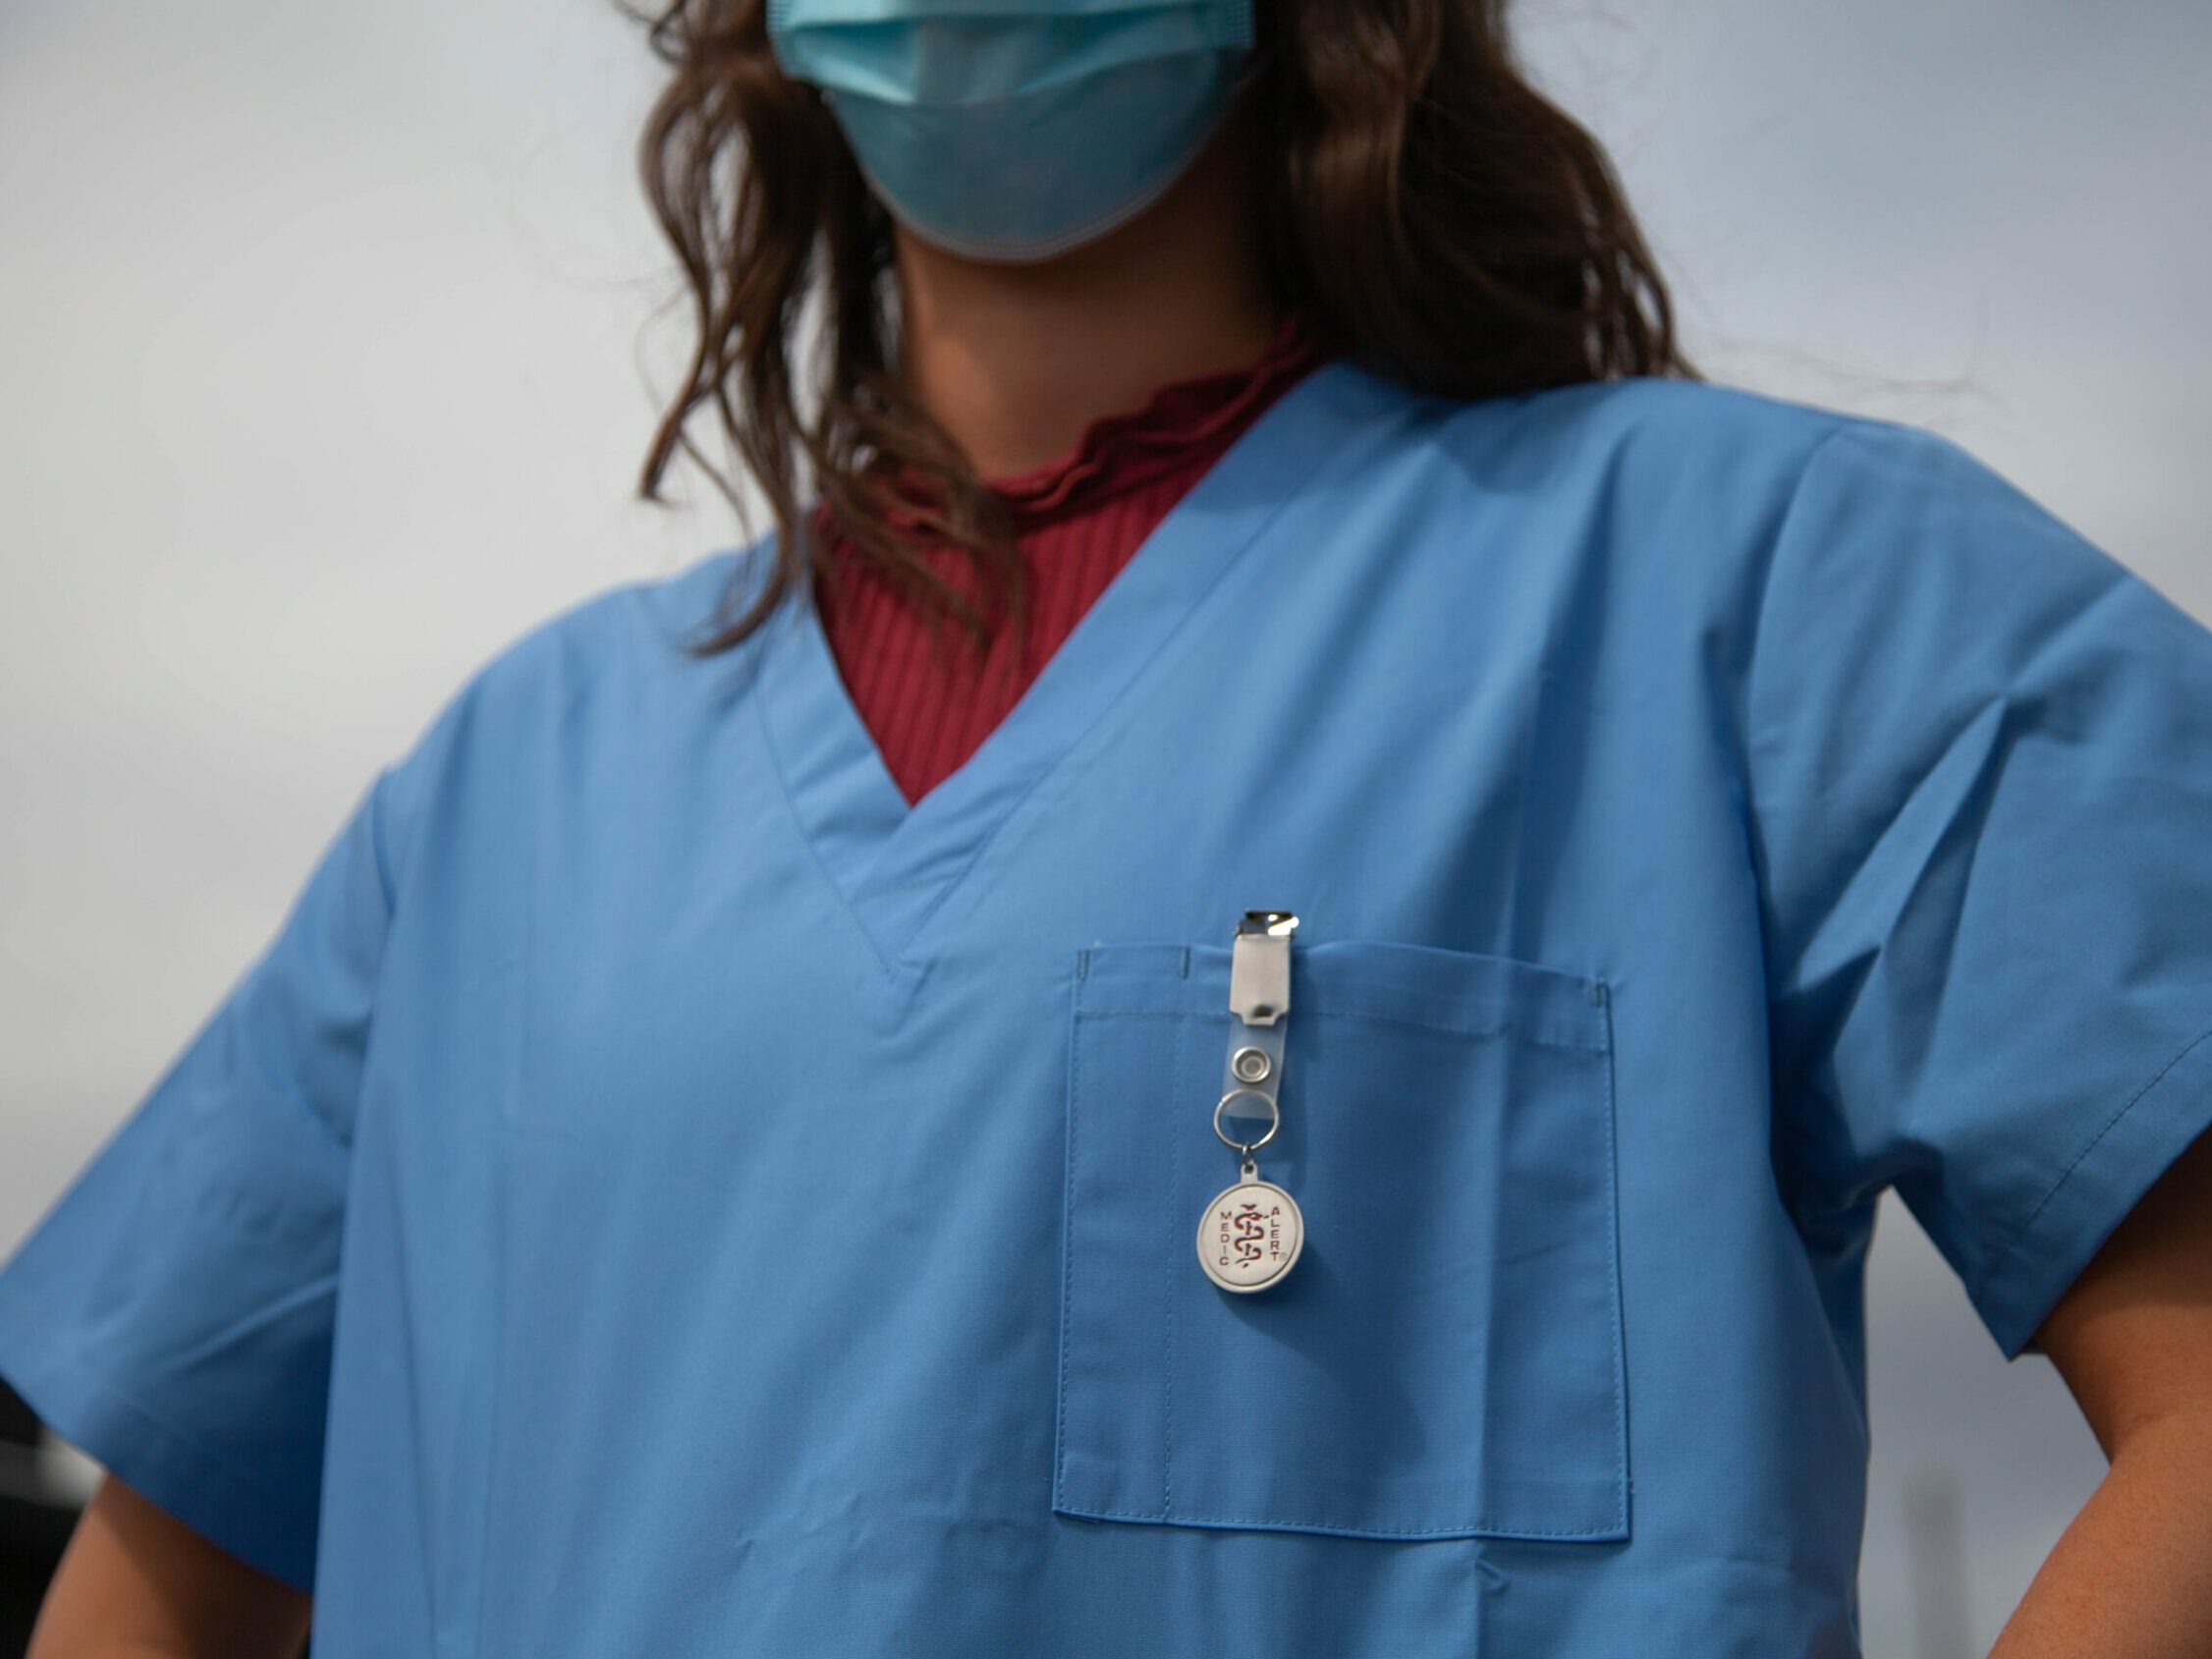 A nurse standing at the ready, wearing scrubs with a MedicAlert ID attached.